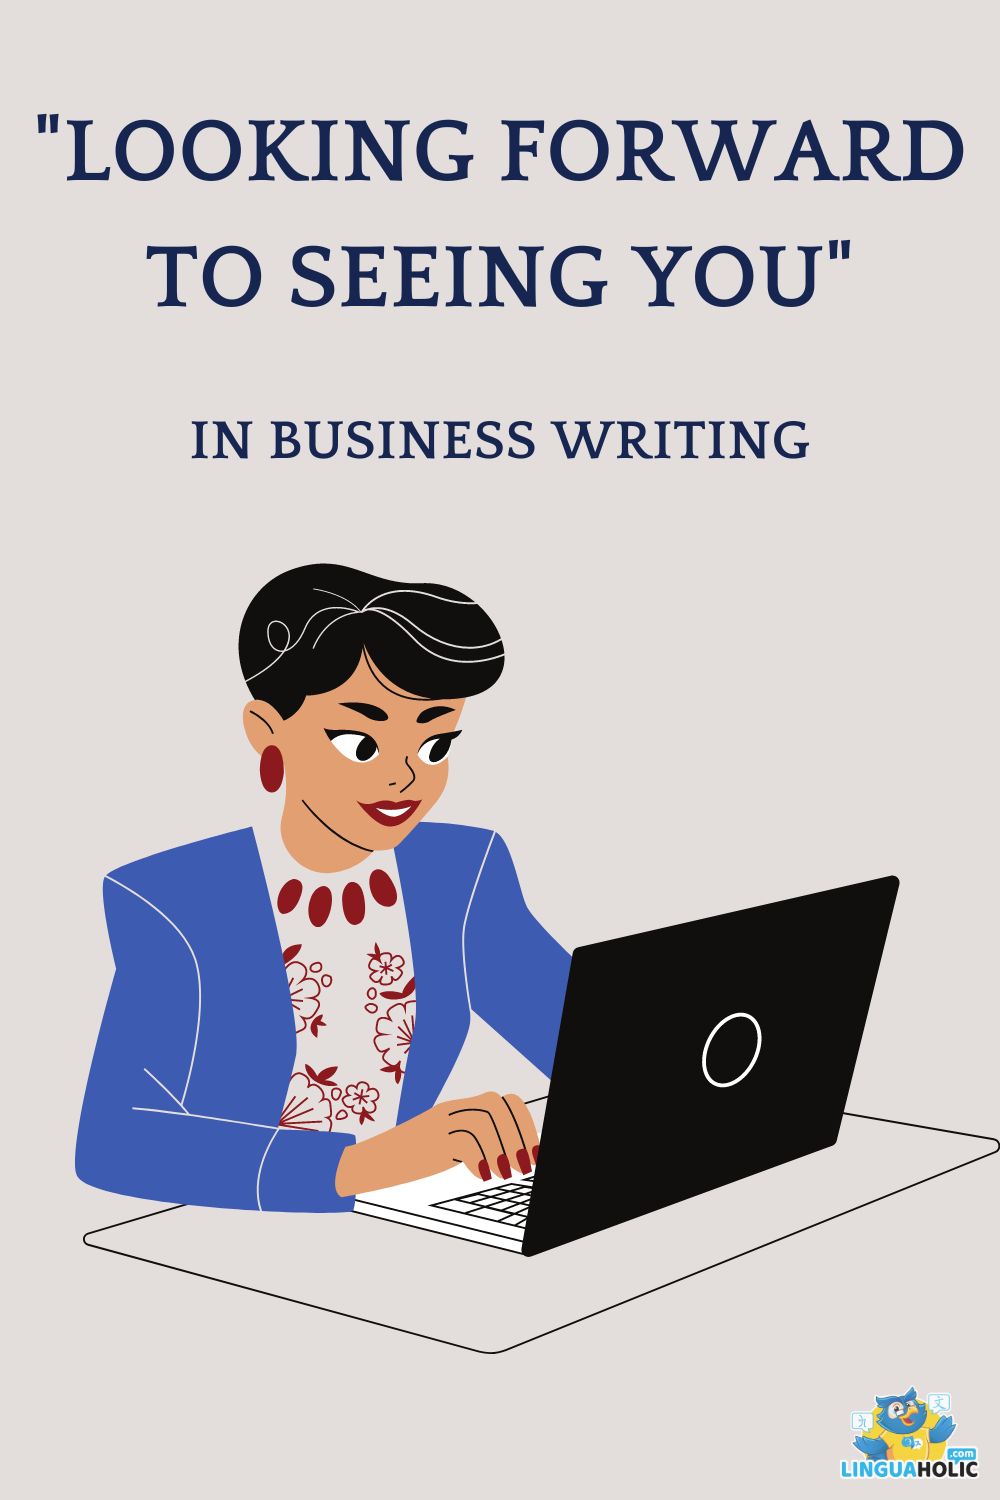 Looking Forward to Seeing You in Business Correspondence